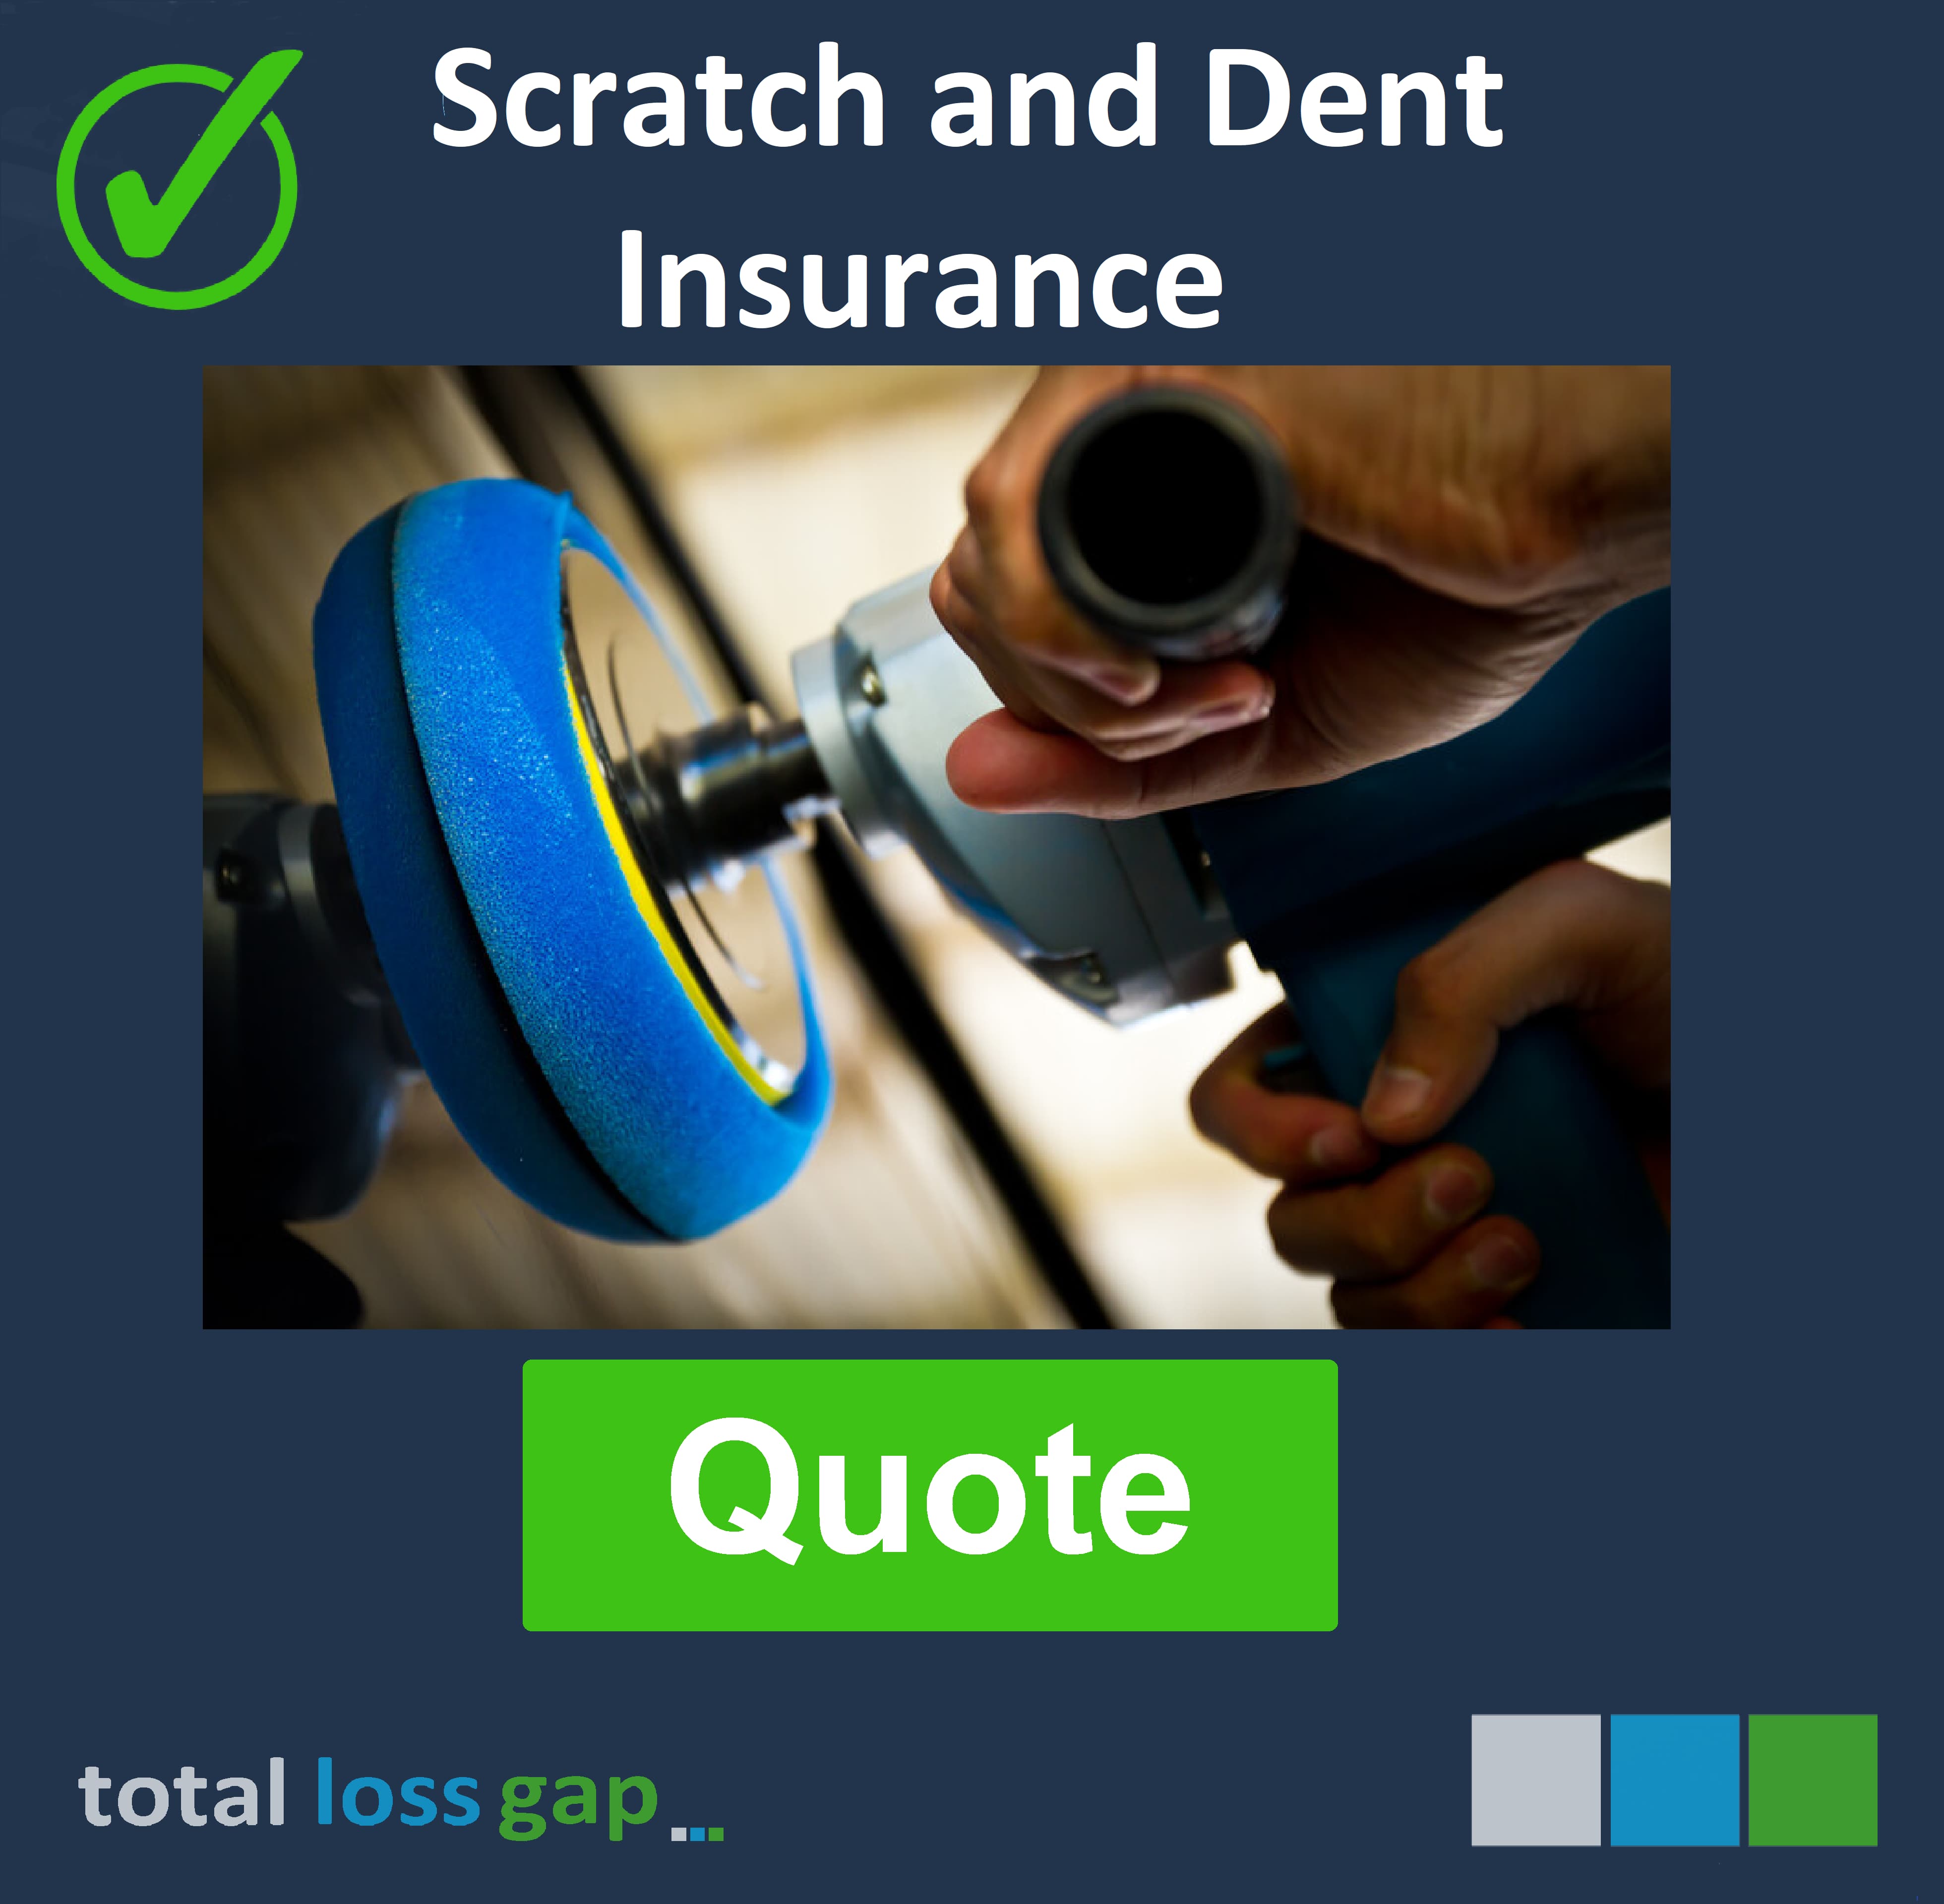 Scratch and Dent insurance for your vehicle